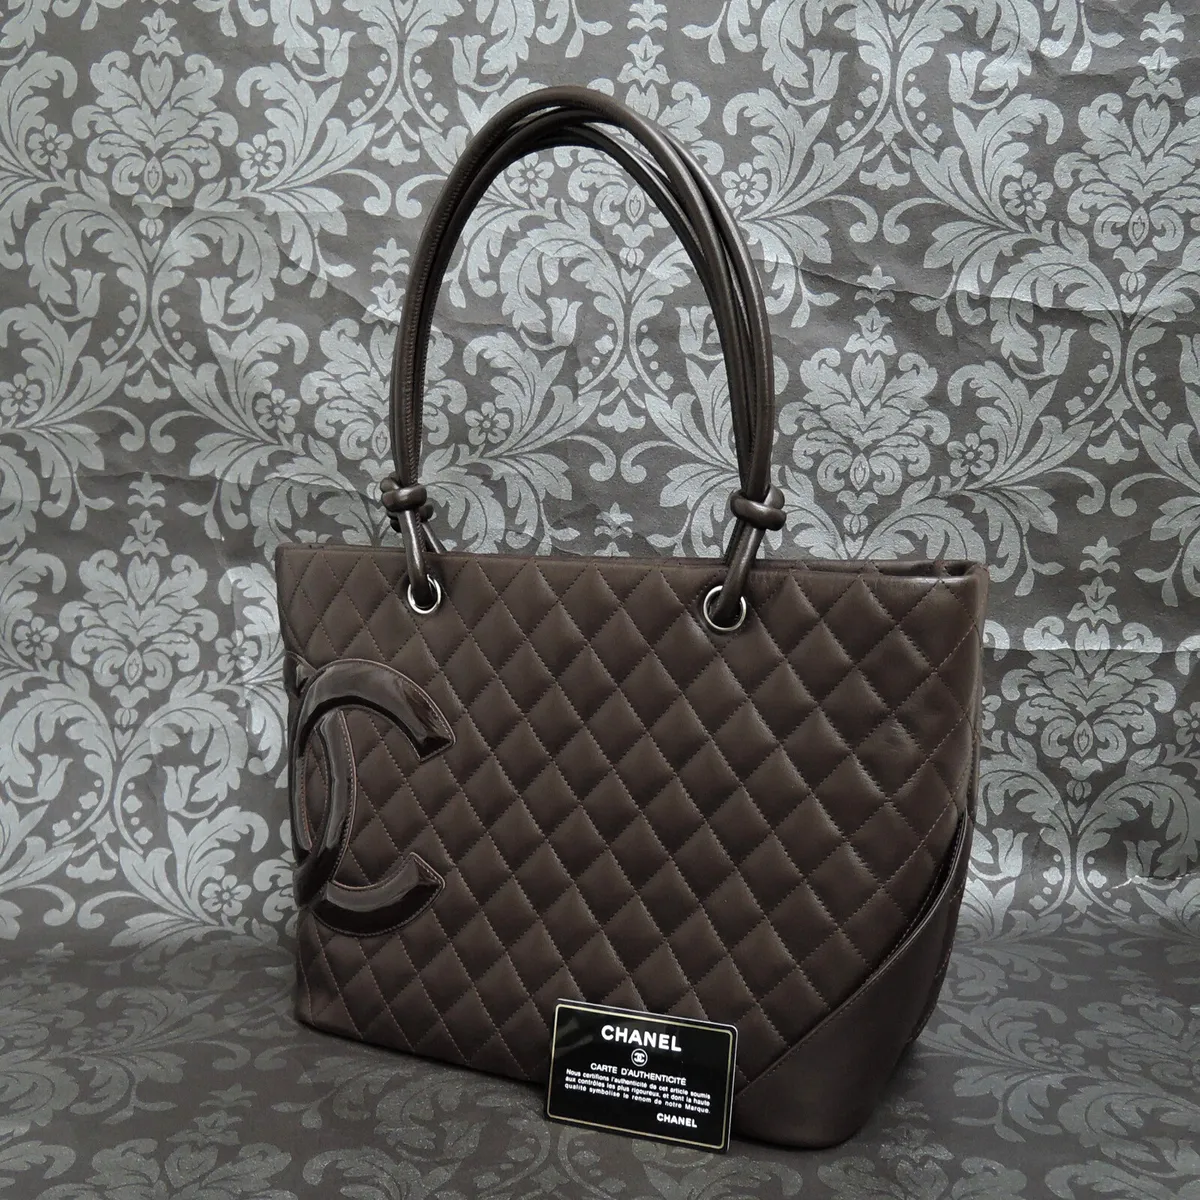 CHANEL Calf Leather Cambon Ligne Brown Quilted Tote Bag Handbag #2504  Rise-on